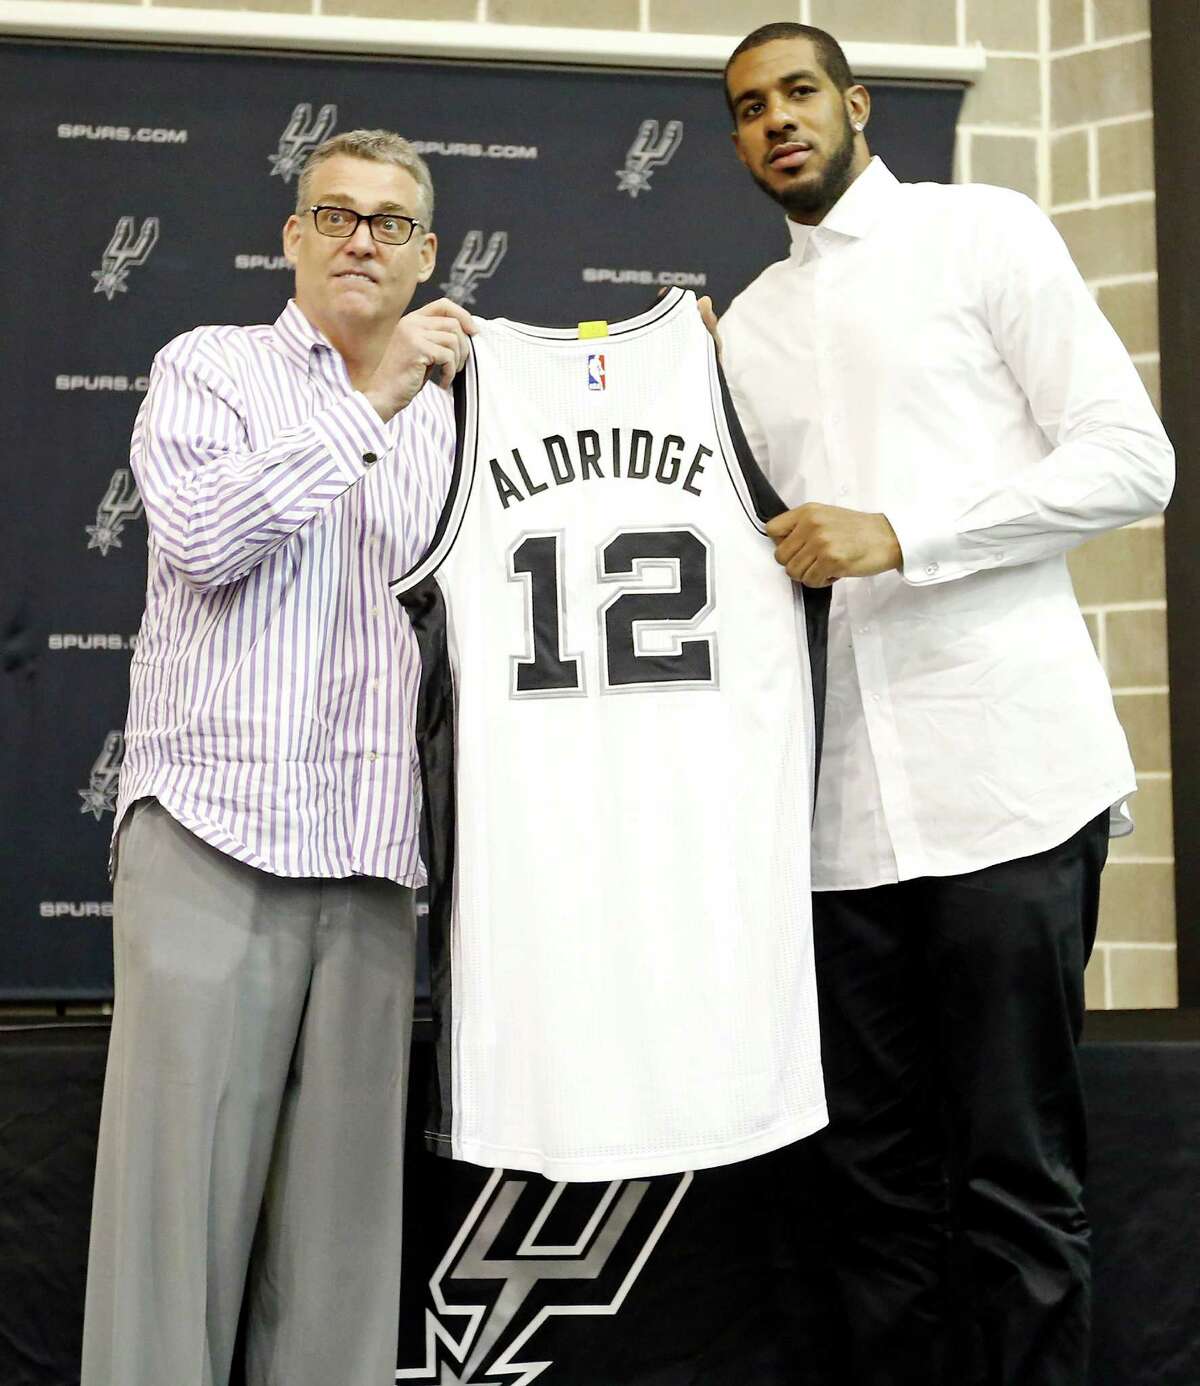 San Antonio Spurs general manager R.C. Buford (left), and LaMarcus Aldridge pose for photos with Aldridge's jersey during a press conference at the Spurs practice facility Friday July 10, 2015 where he was officially introduced.